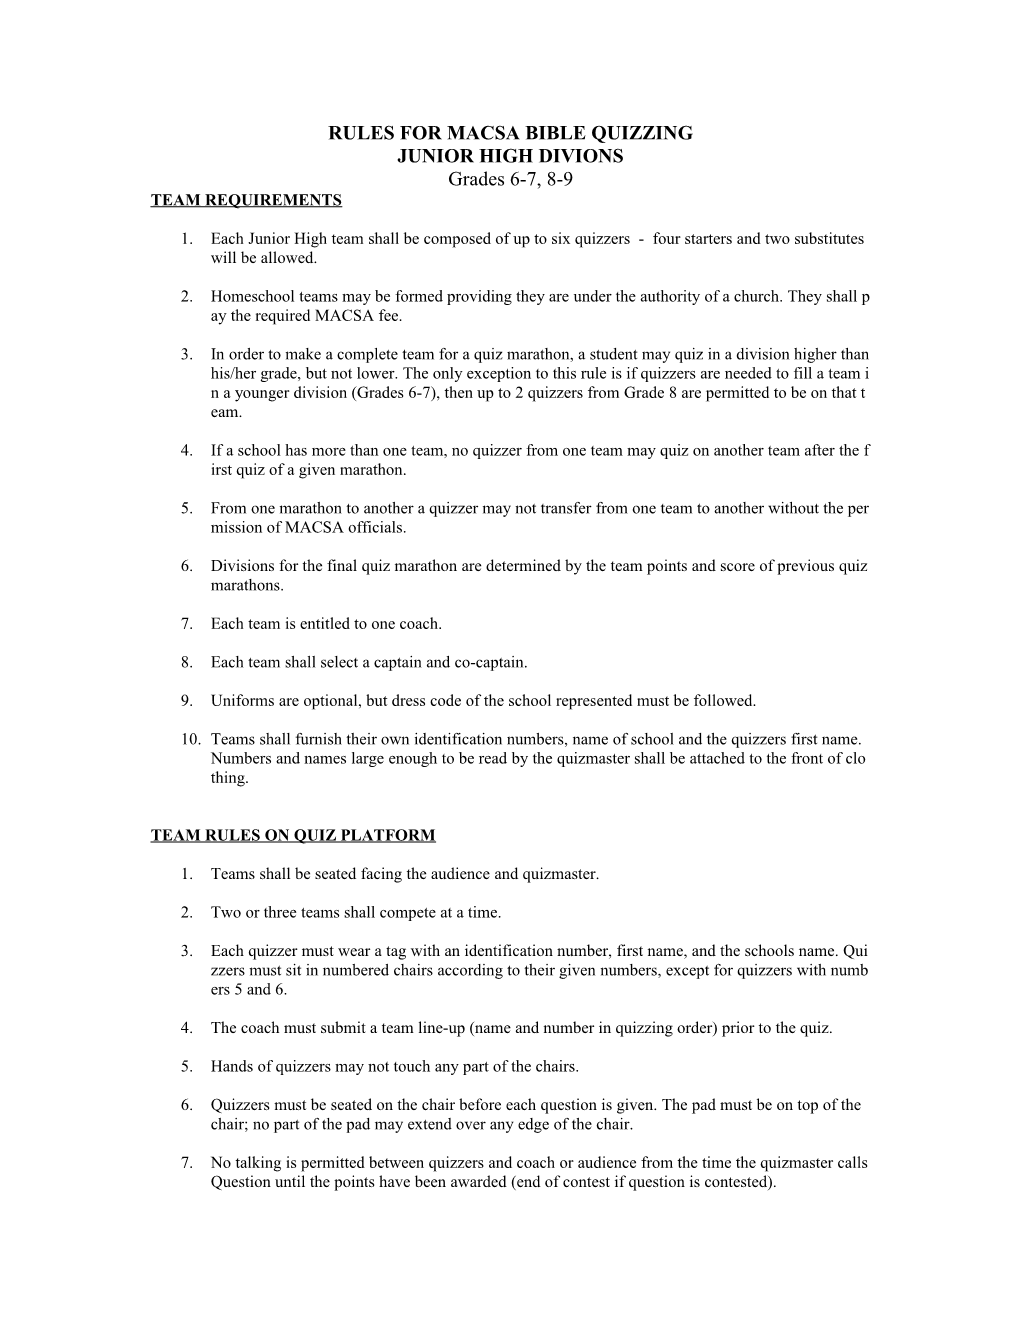 Rules for Macsa Bible Quizzing